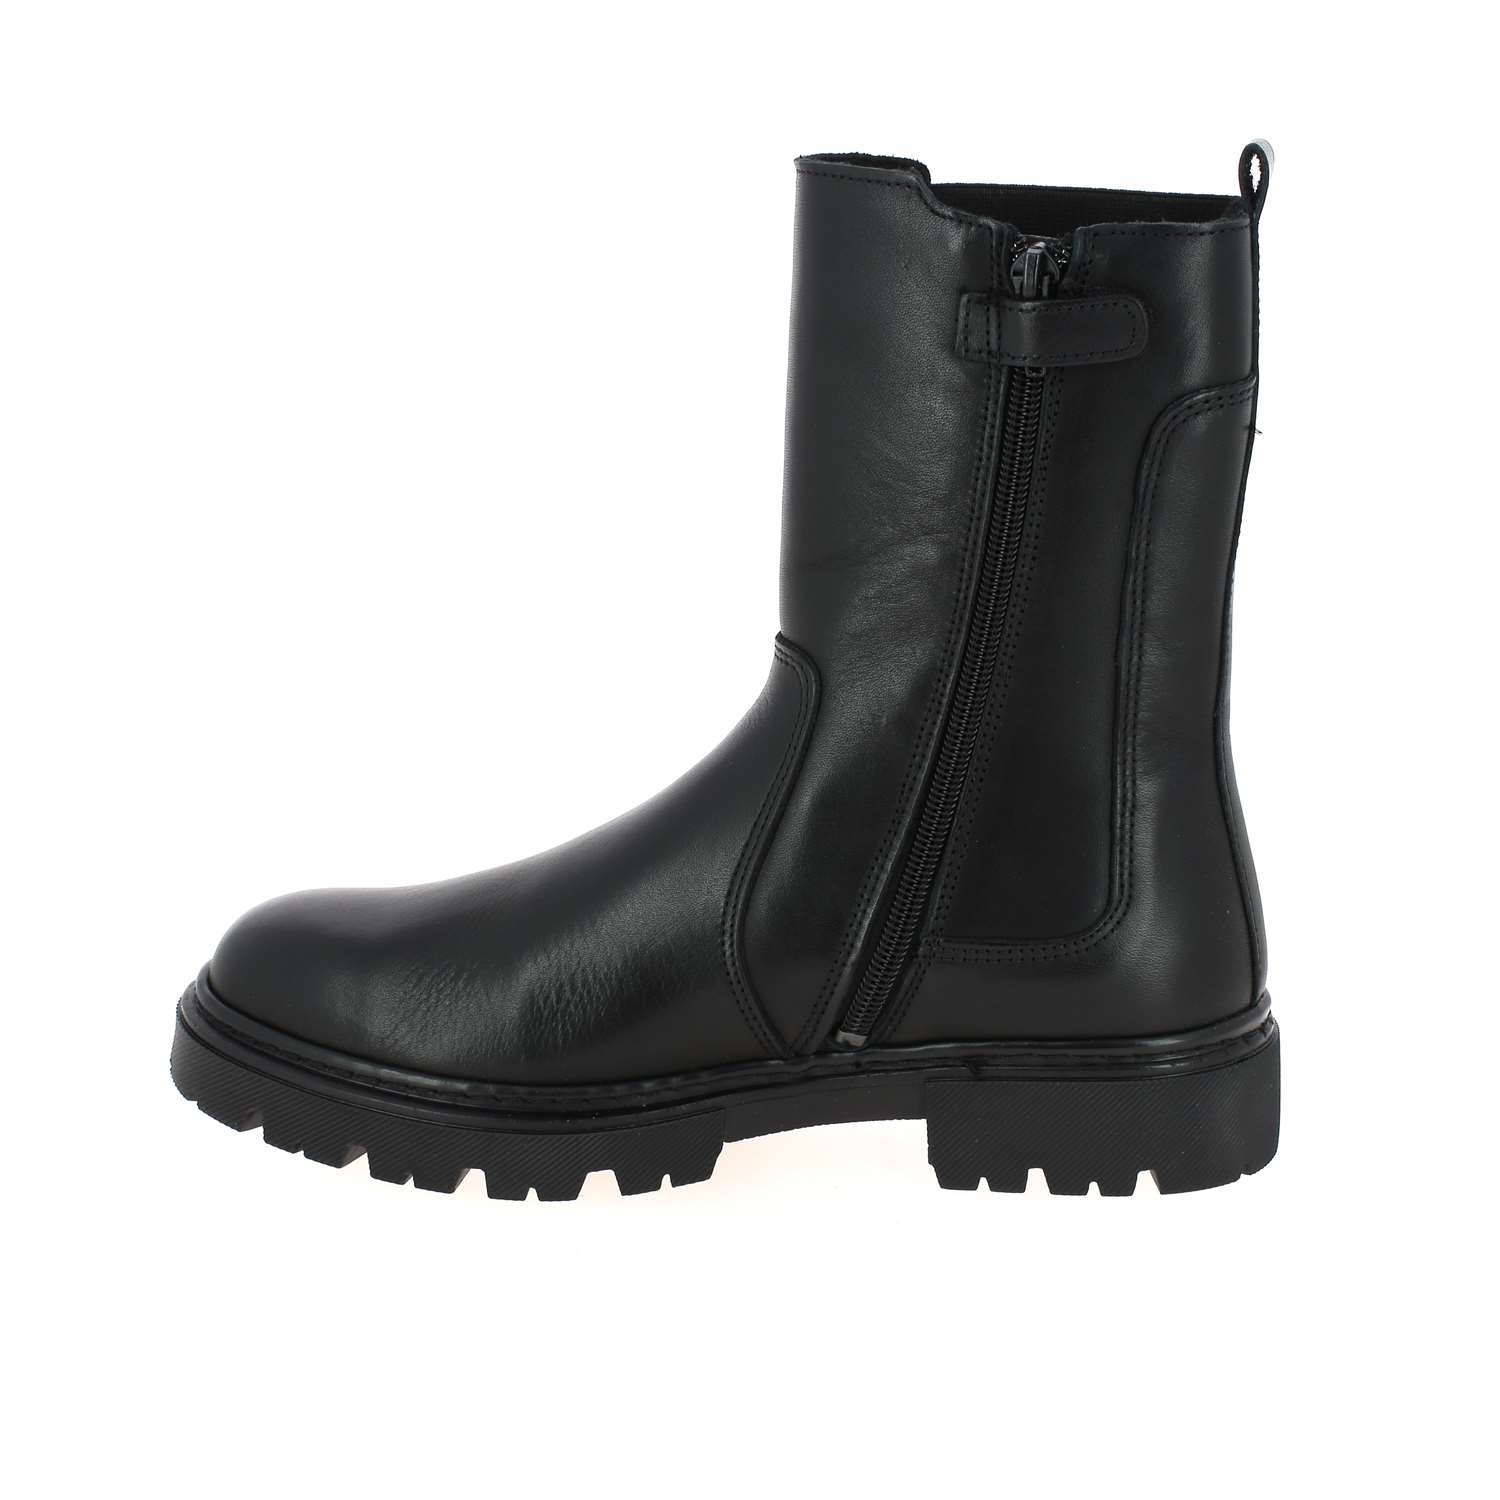 05 - BUMODE -  - Bottes - Cuir